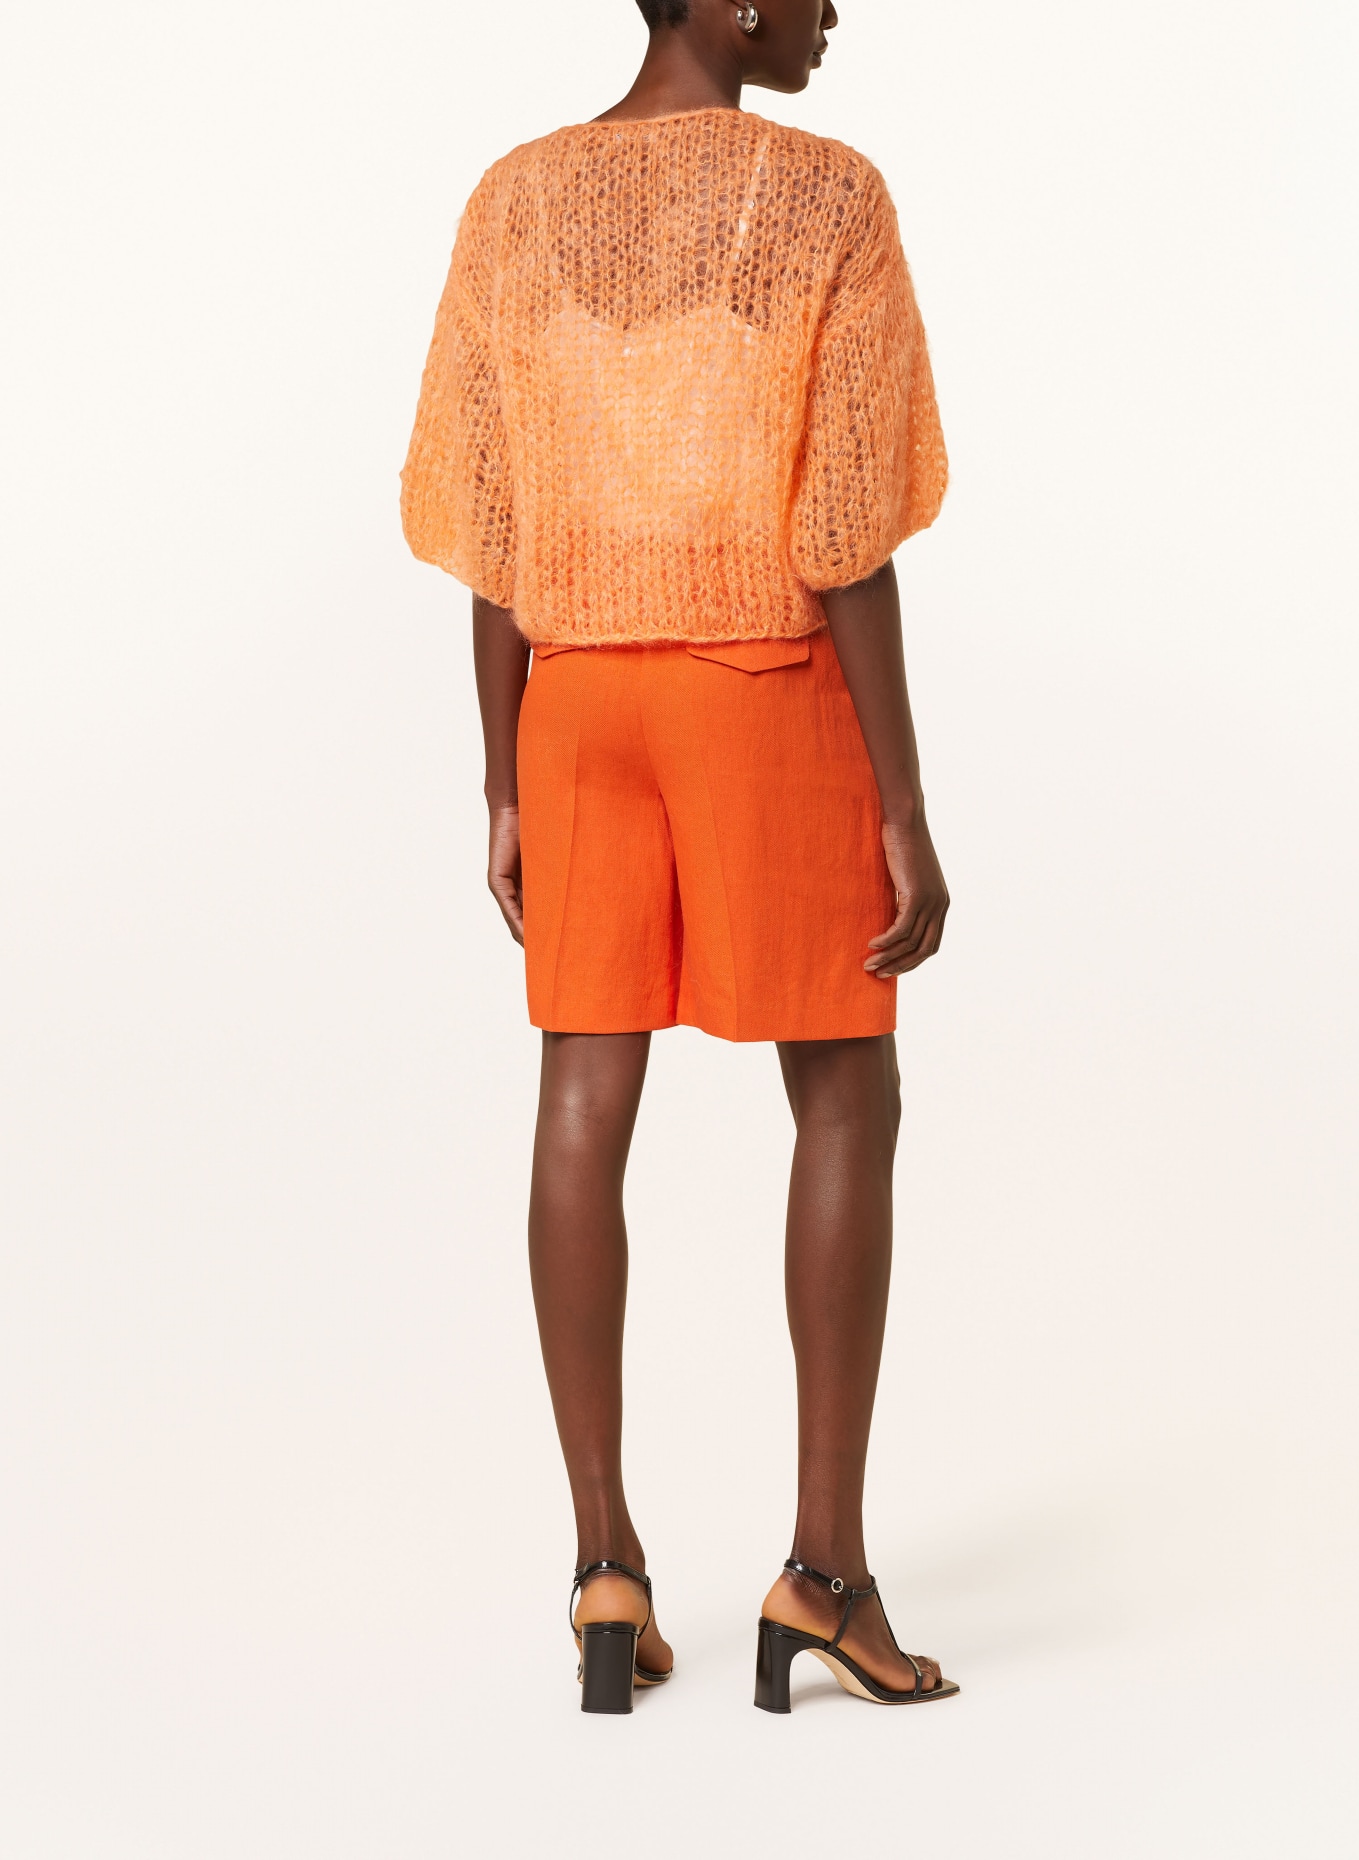 MAIAMI Mohair sweater with 3/4 sleeves, Color: ORANGE (Image 3)